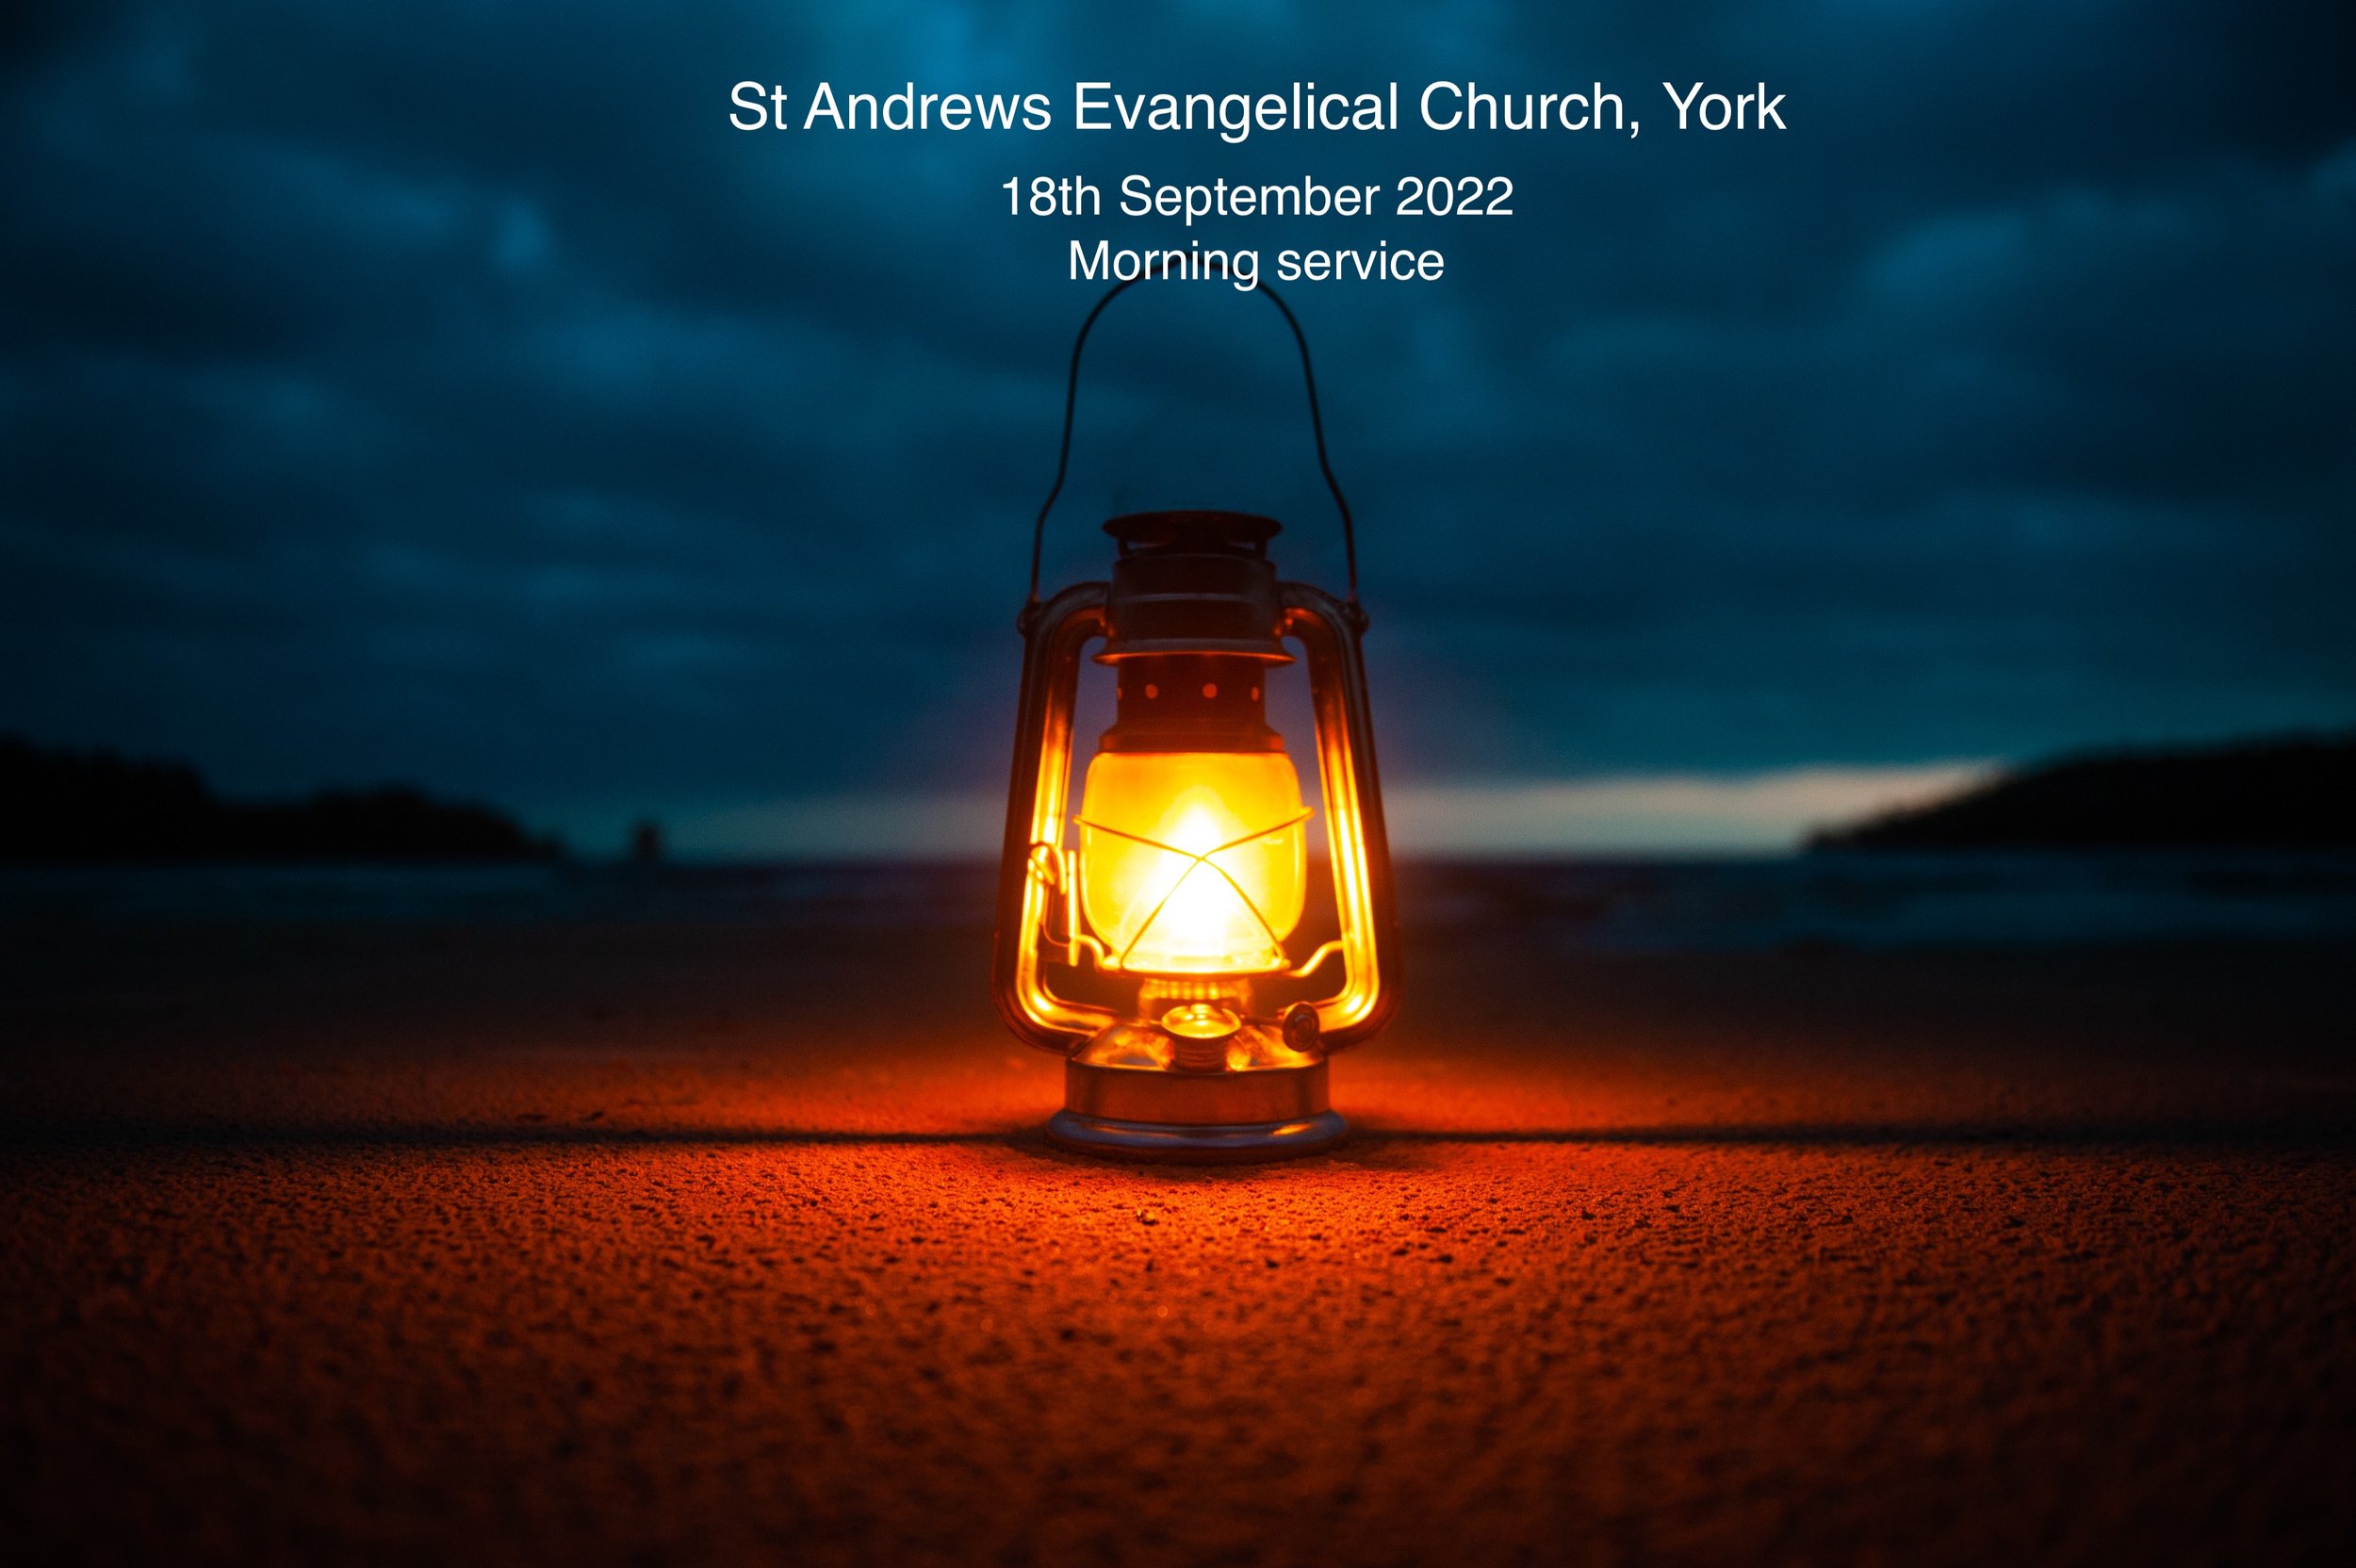 Brian Liddle: Morning service